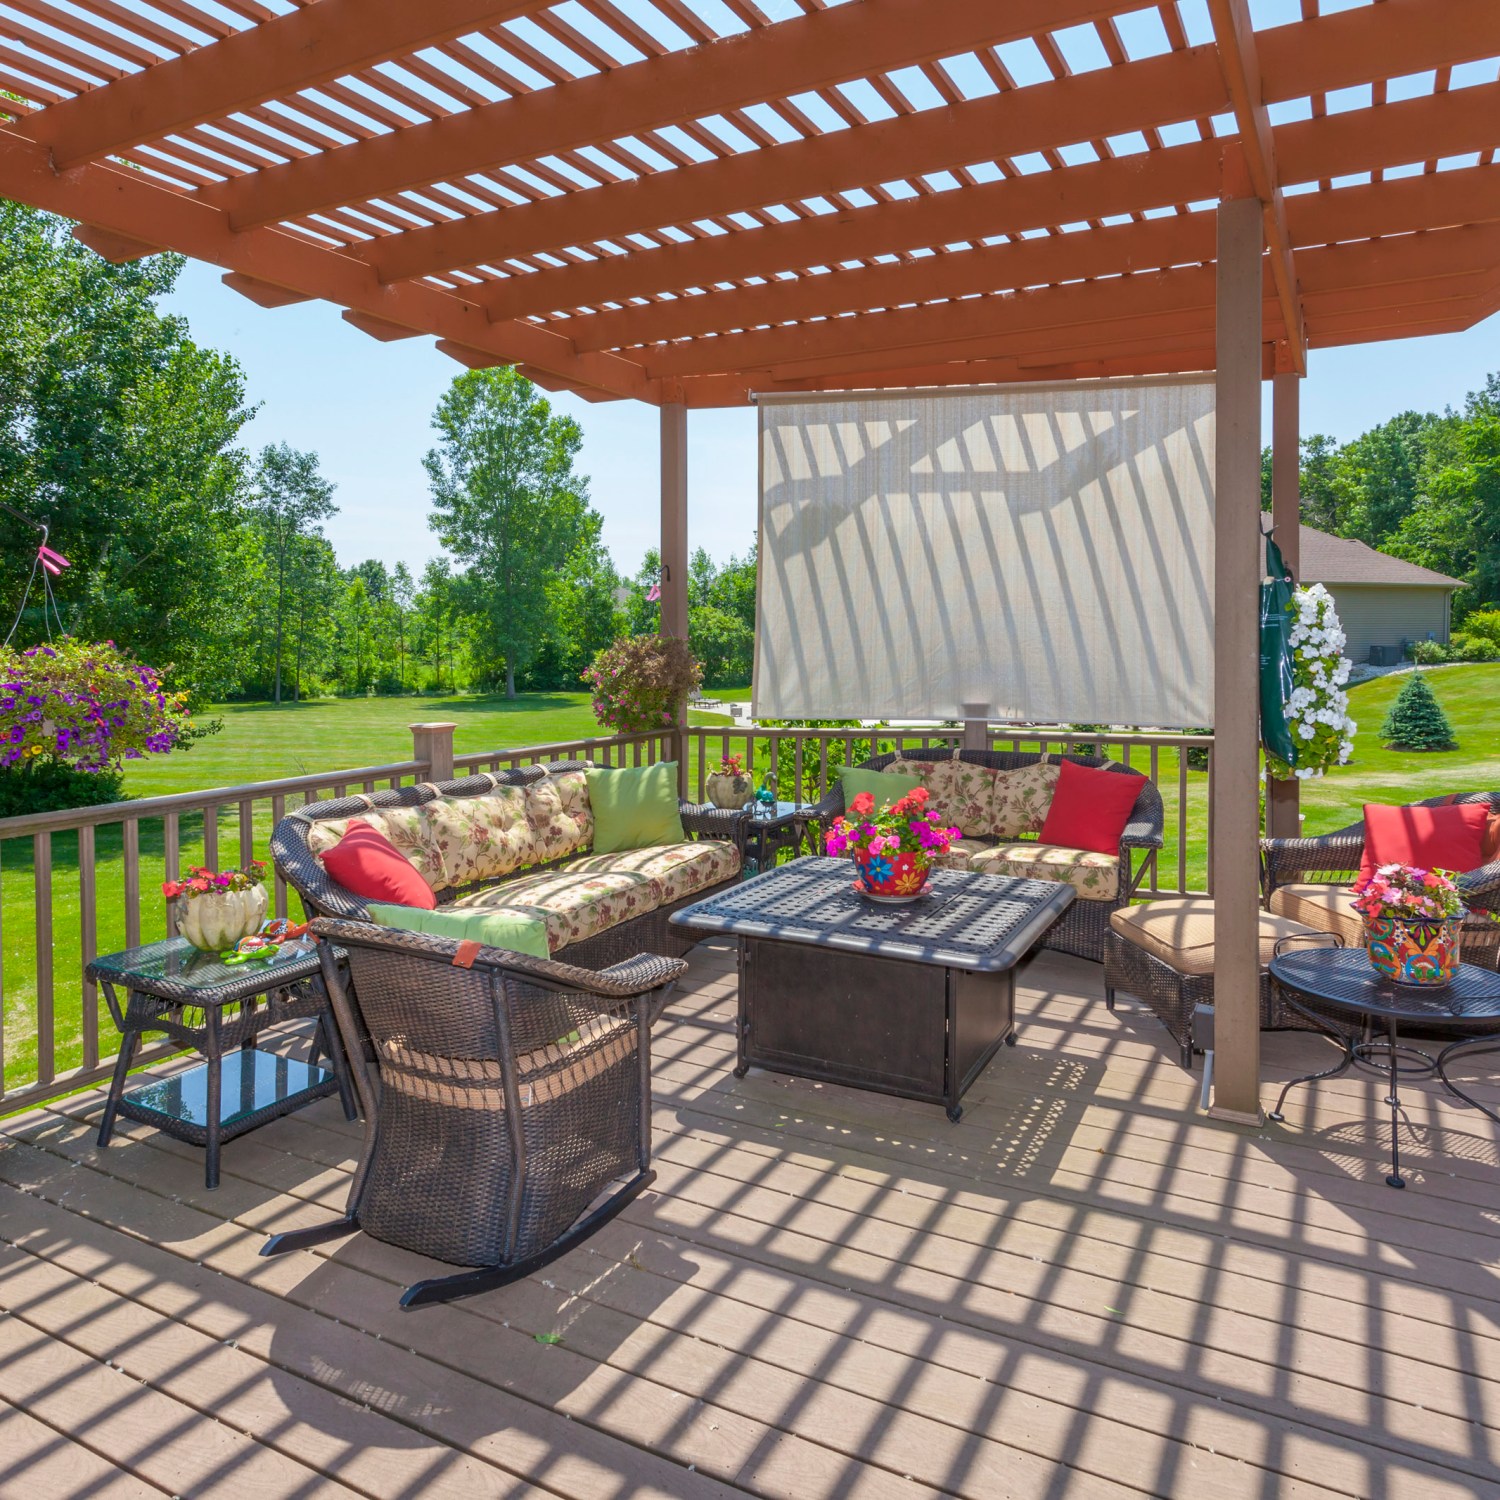 An inviting backyard deck with chairs, a table and a pergola to cover it.